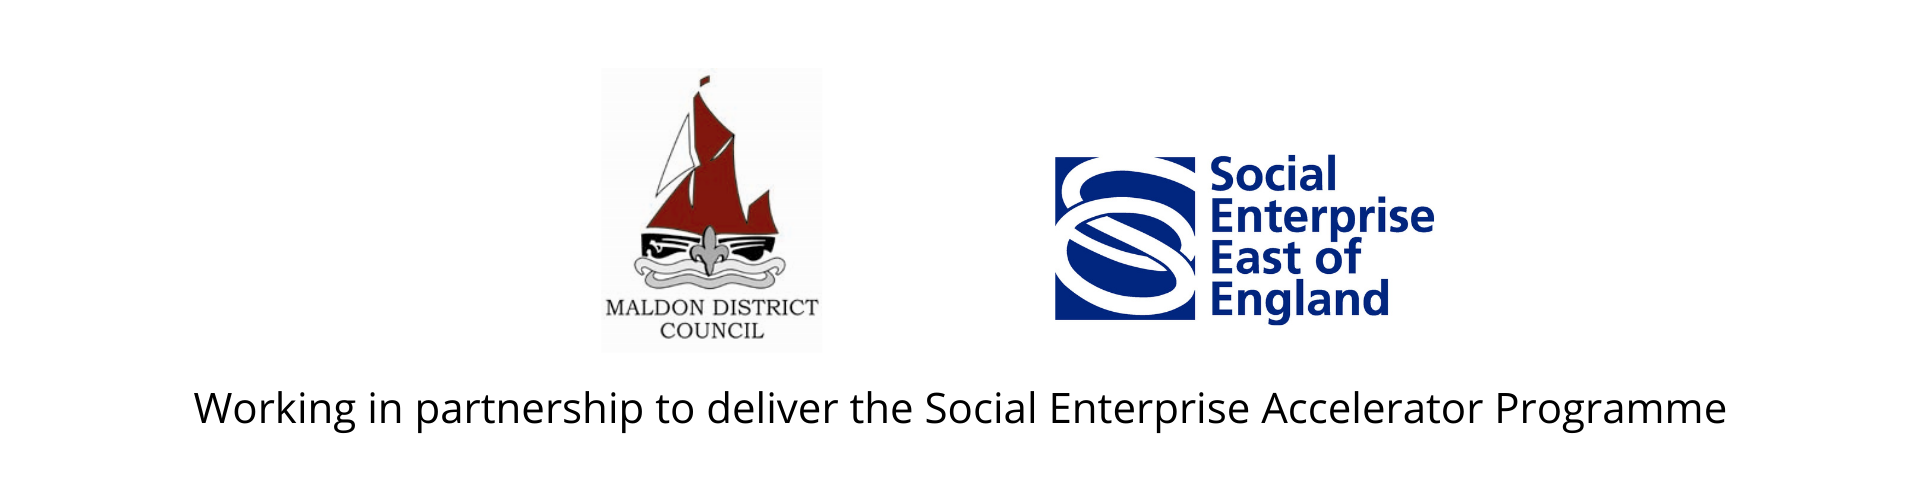 £250,000 Social Enterprise Accelerator Fund Launches in the Maldon District